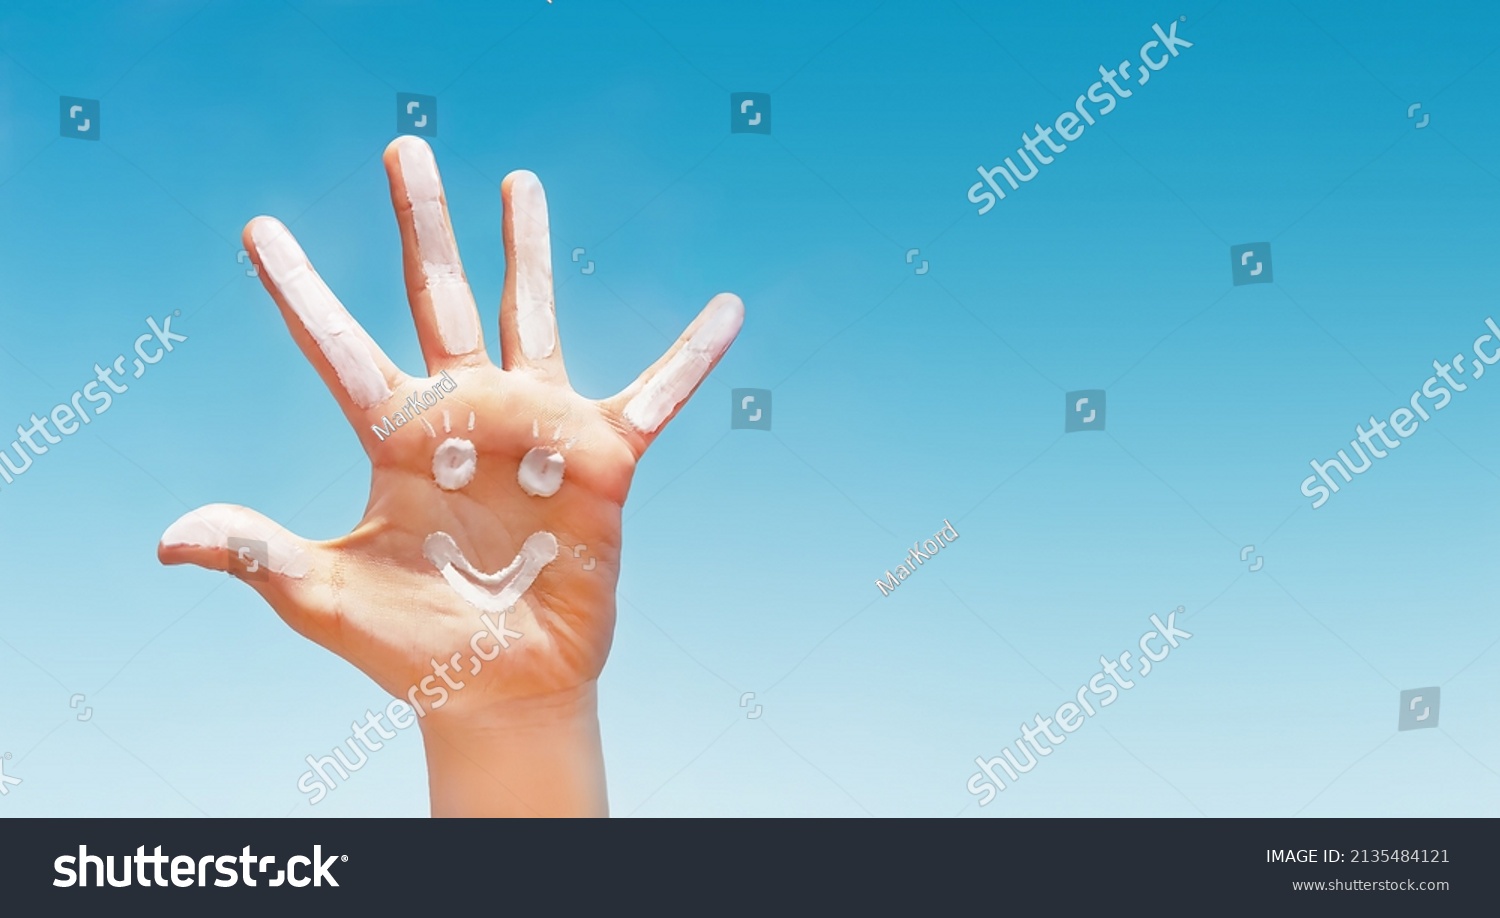 Positive symbol drawing by sunscreen (sun cream, suntan lotion) on caucasian open hand on blue sky background. Concept of protection (safety) from sun, skin care, happy summer vacation. Copy space. 
 #2135484121